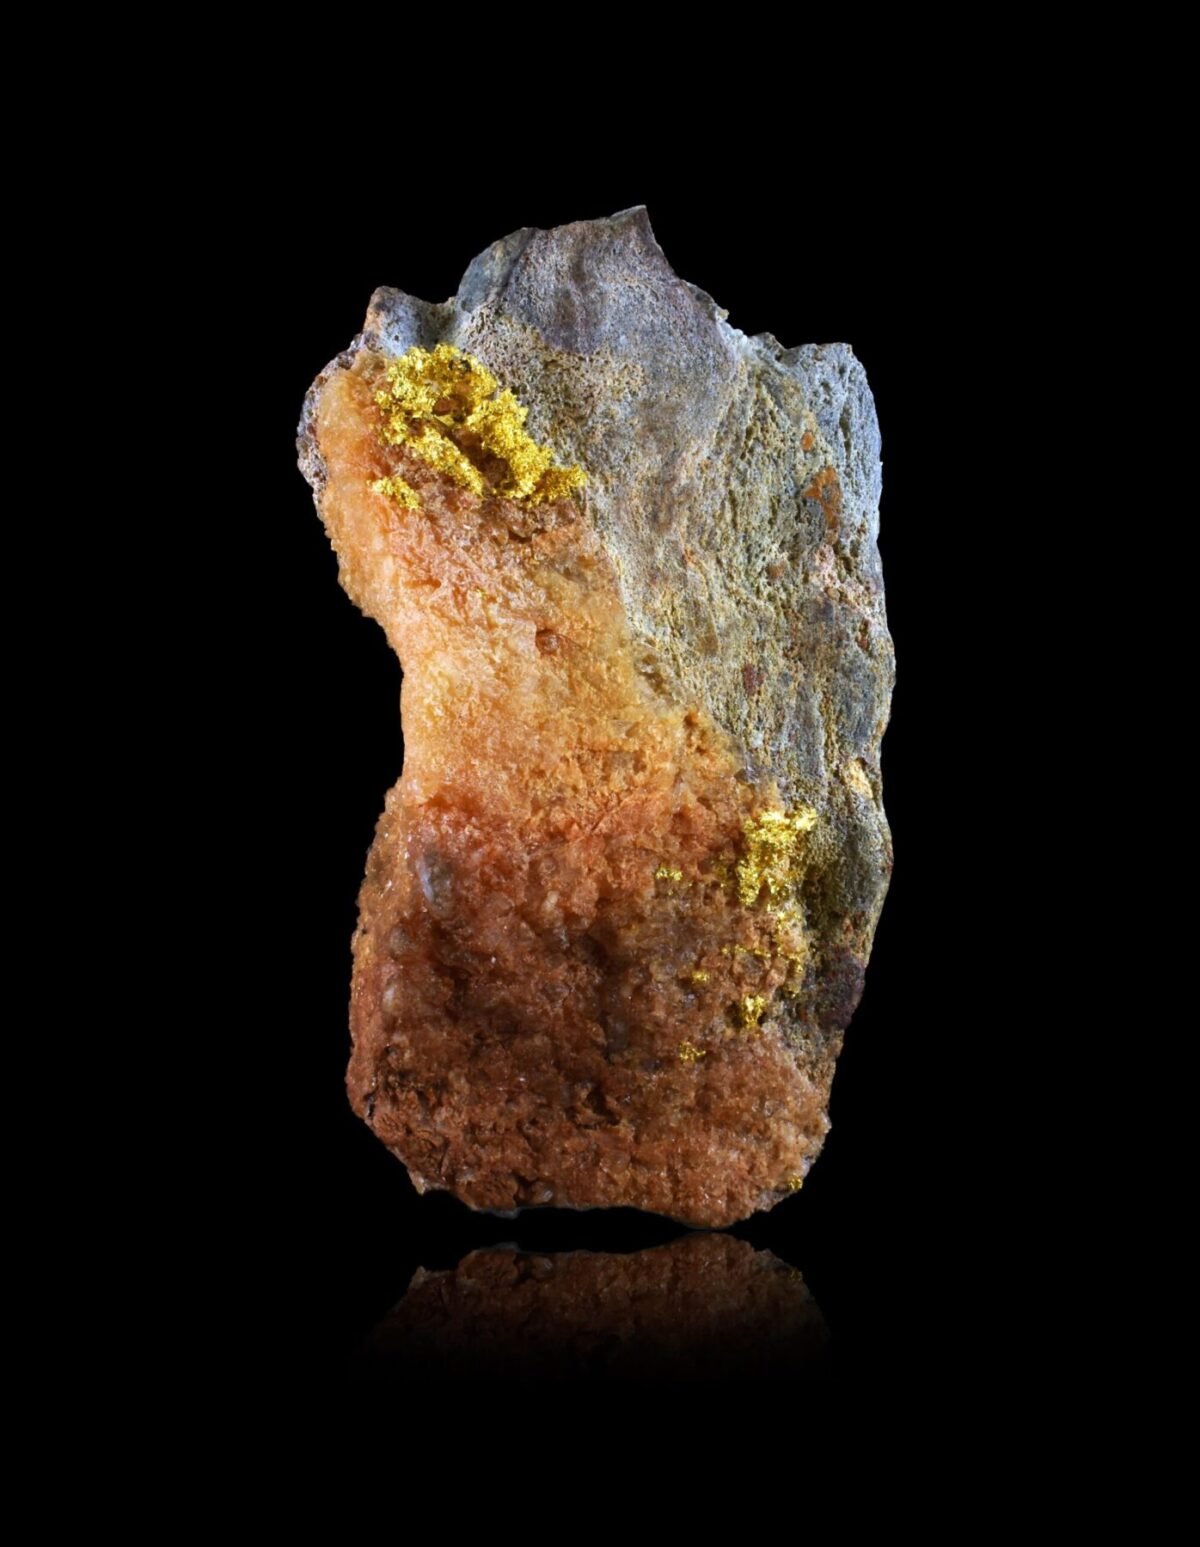 Native Gold on Quartz from Brusson, Italy